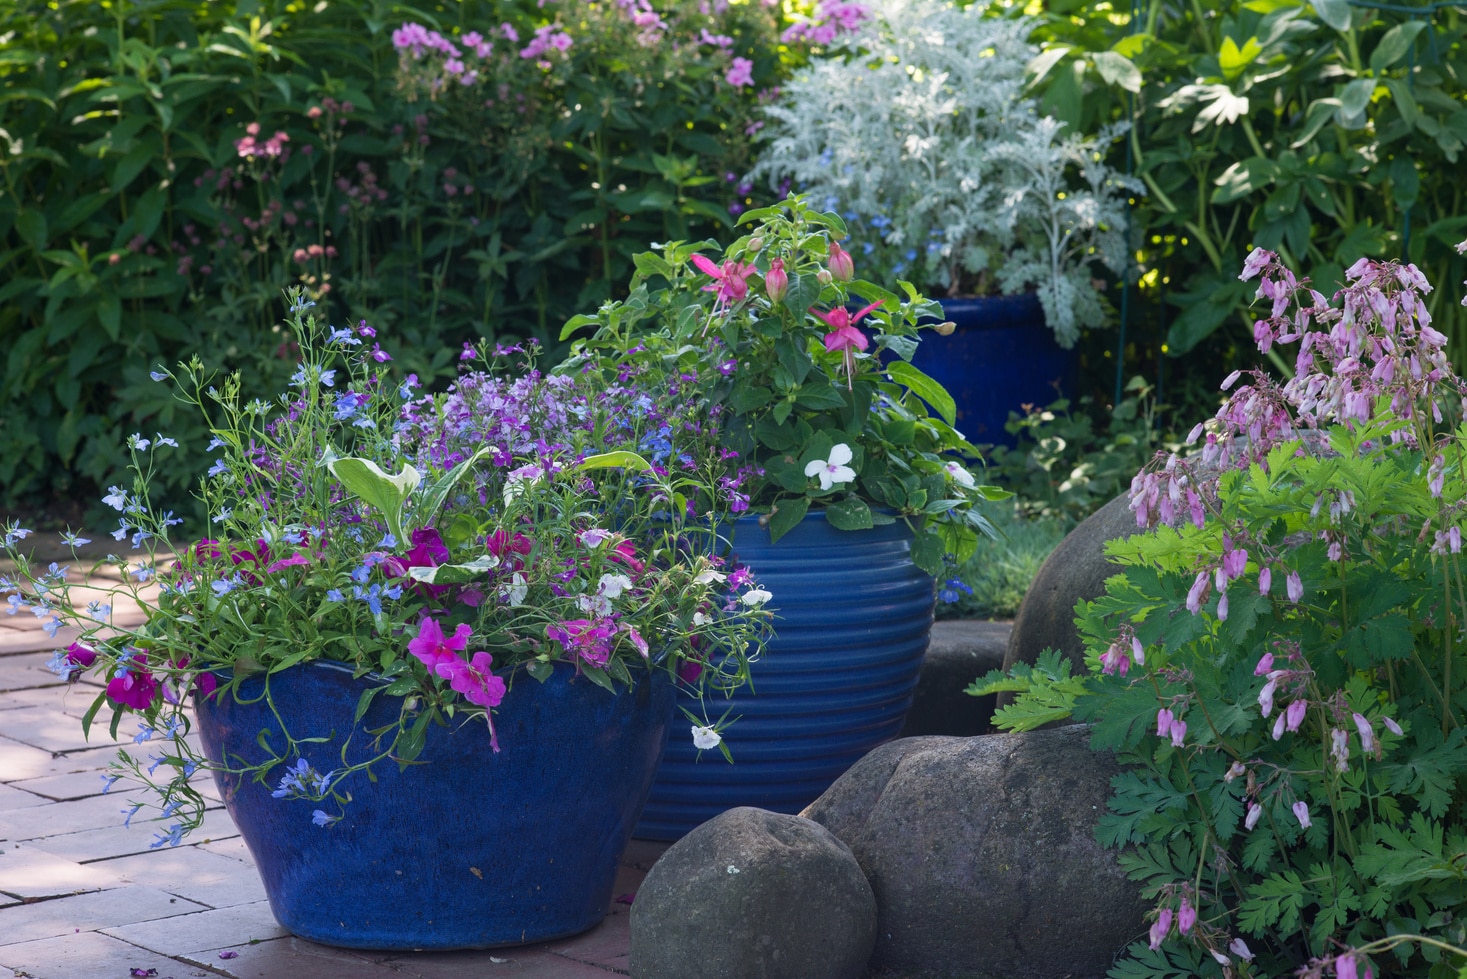 Bright blue pots overflow with colorful flowers in a shaded brick patio.